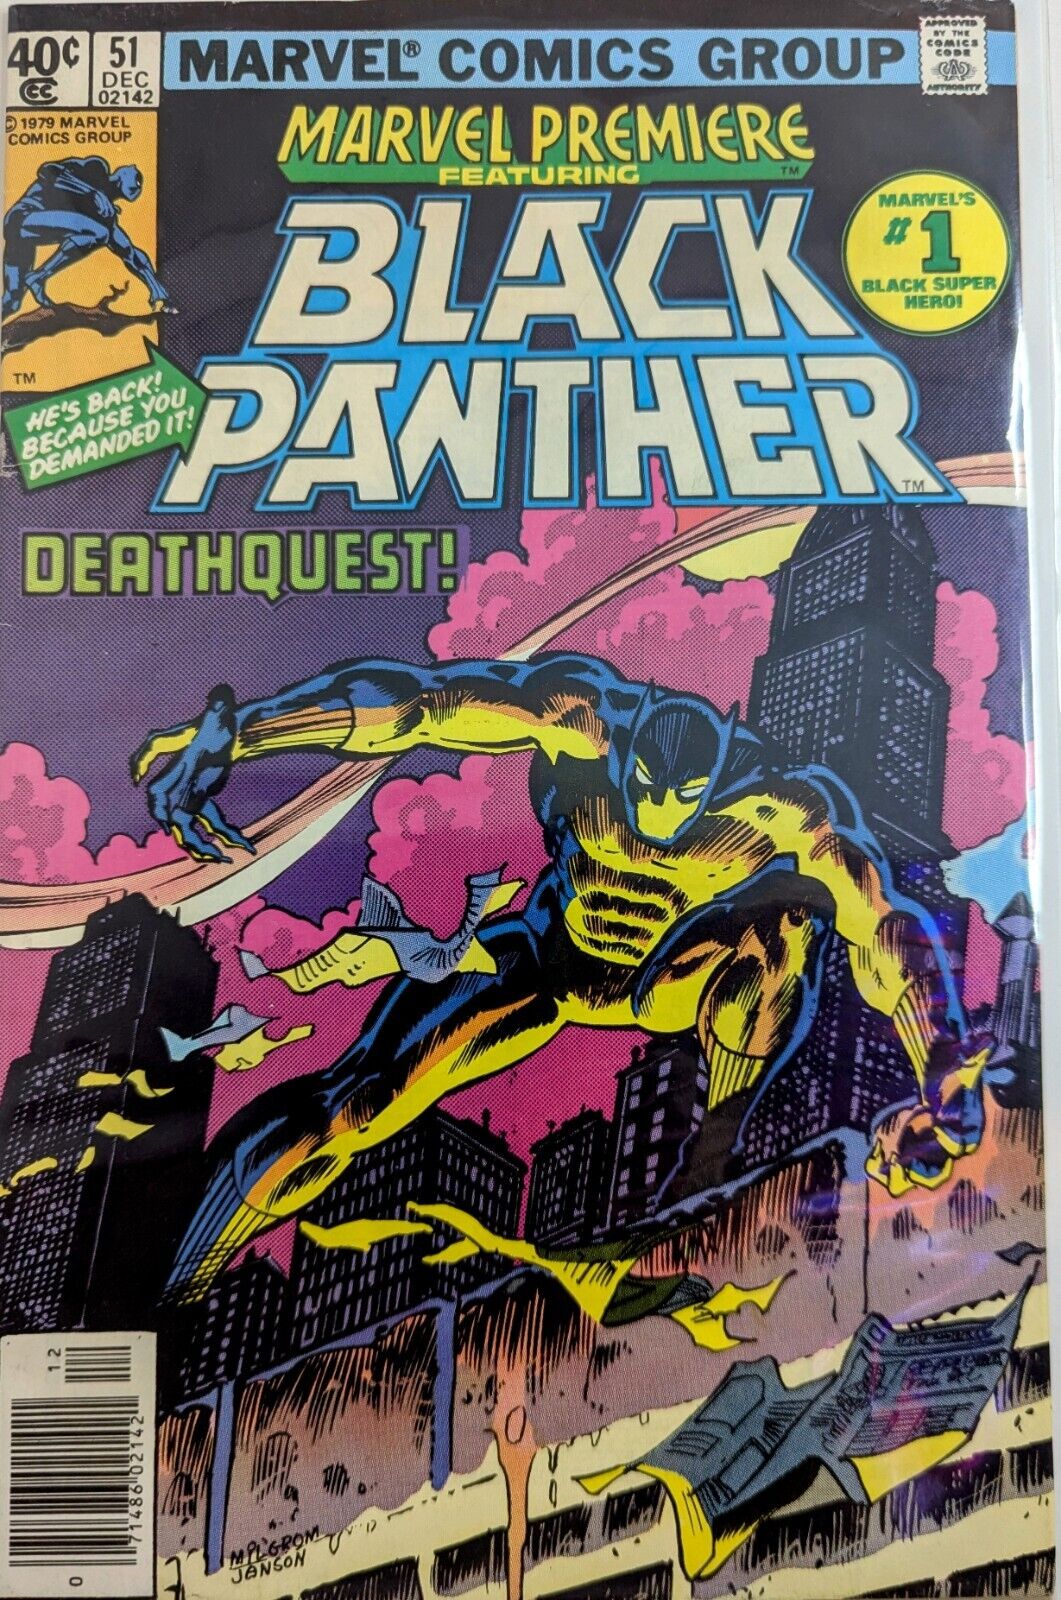 Marvel Premiere #51 featuring the Black Panther (Marvel 1979)